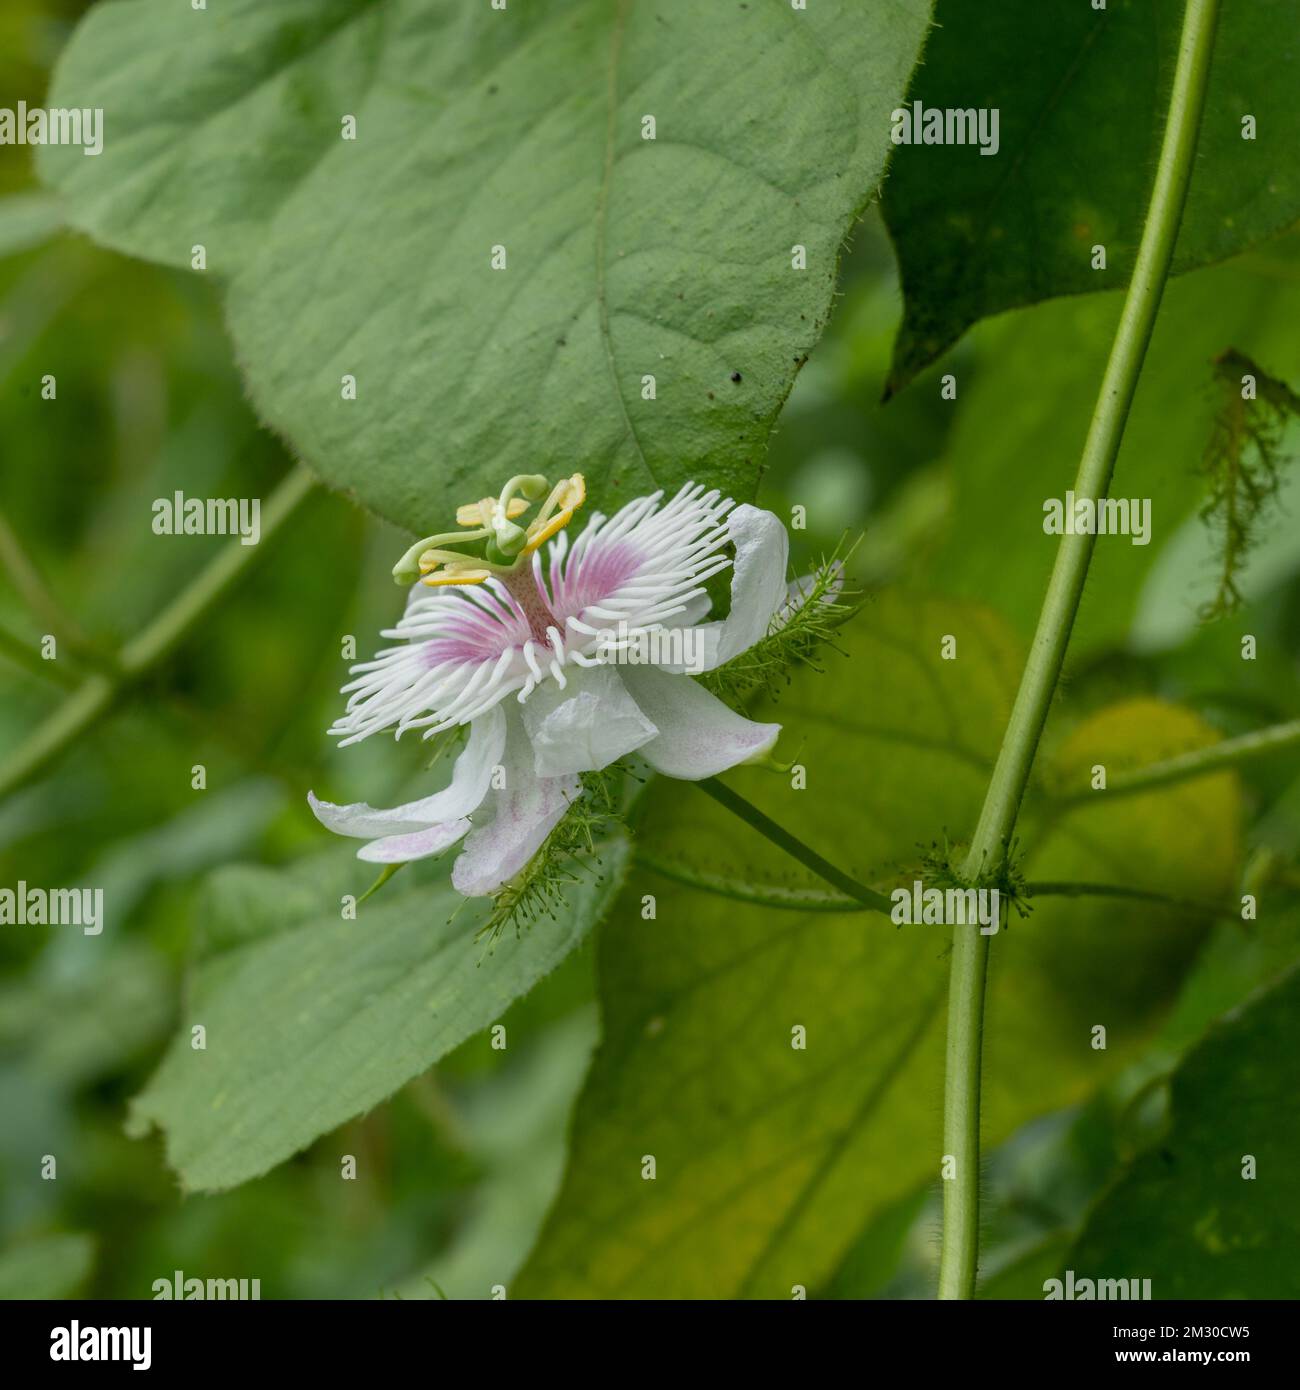 Closeup view of white and purple pink flower of wild passiflora foetida blooming outdoors on natural background Stock Photo